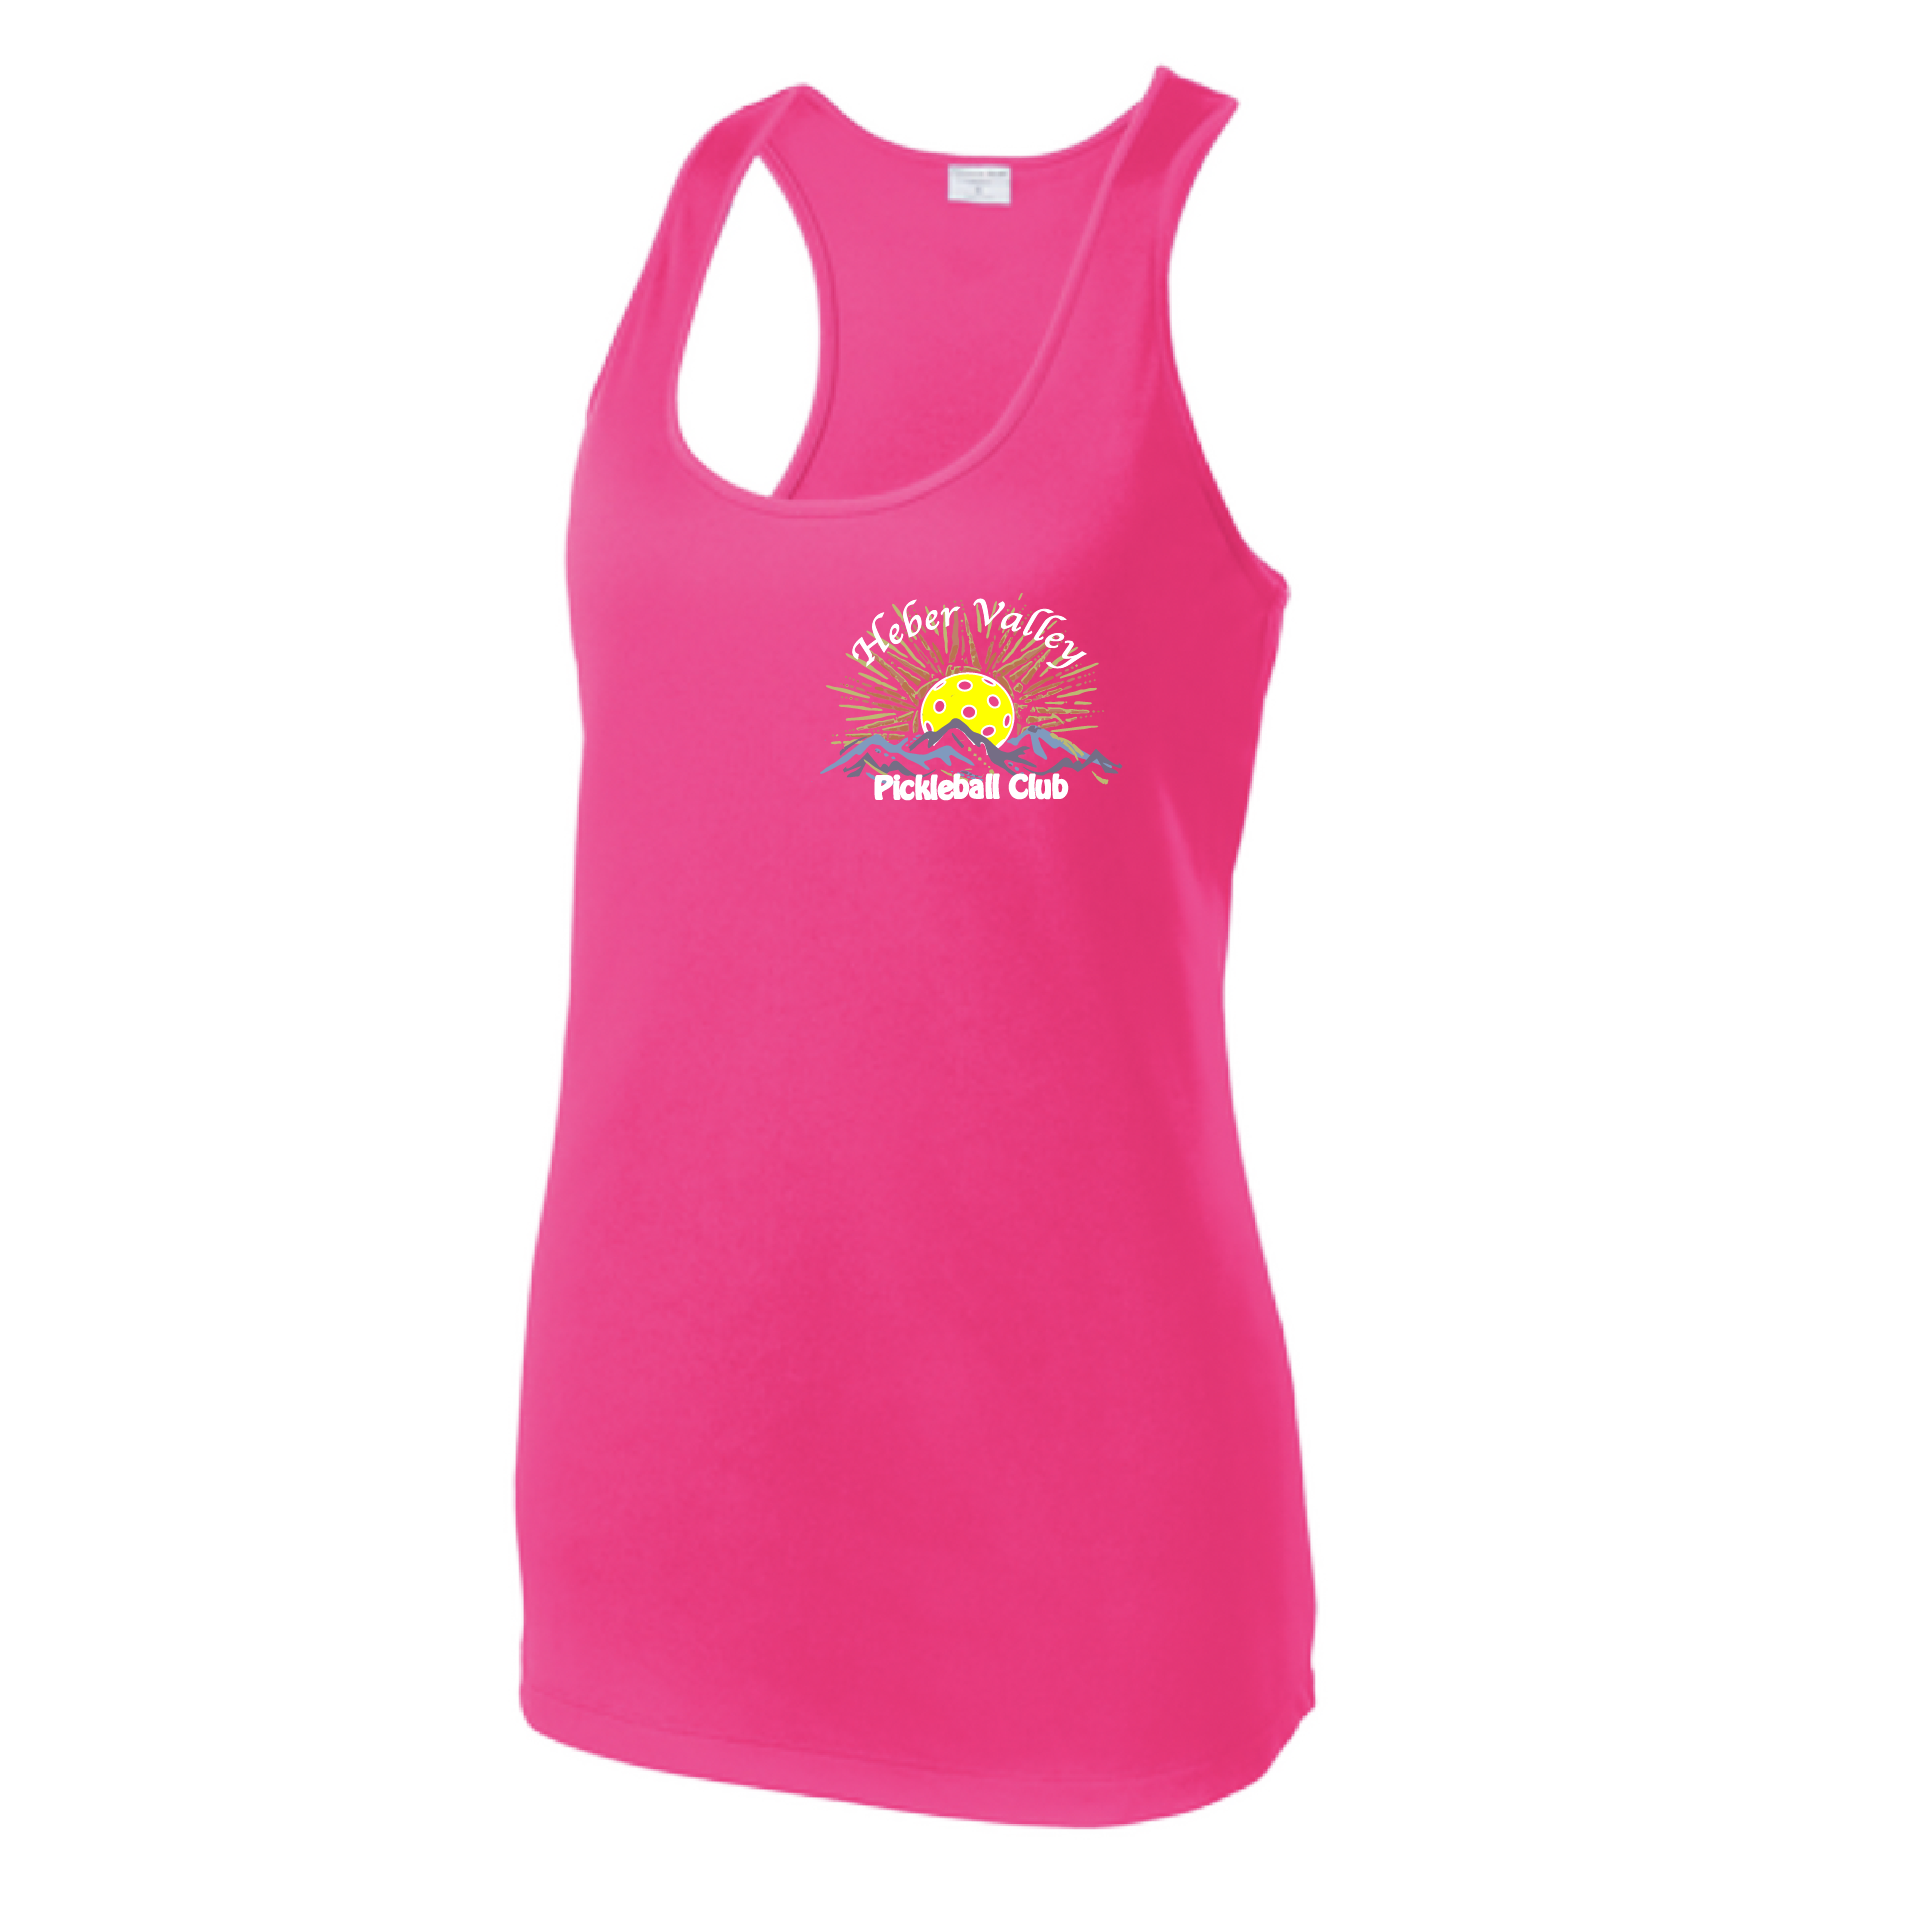 Pickleball Shirt Design: Heber Valley Pickleball Club  Women's Style: Racerback Tank  Turn up the volume in this Women's shirt with its perfect mix of softness and attitude. Material is ultra-comfortable with moisture wicking properties and tri-blend softness. PosiCharge technology locks in color. Highly breathable and lightweight.